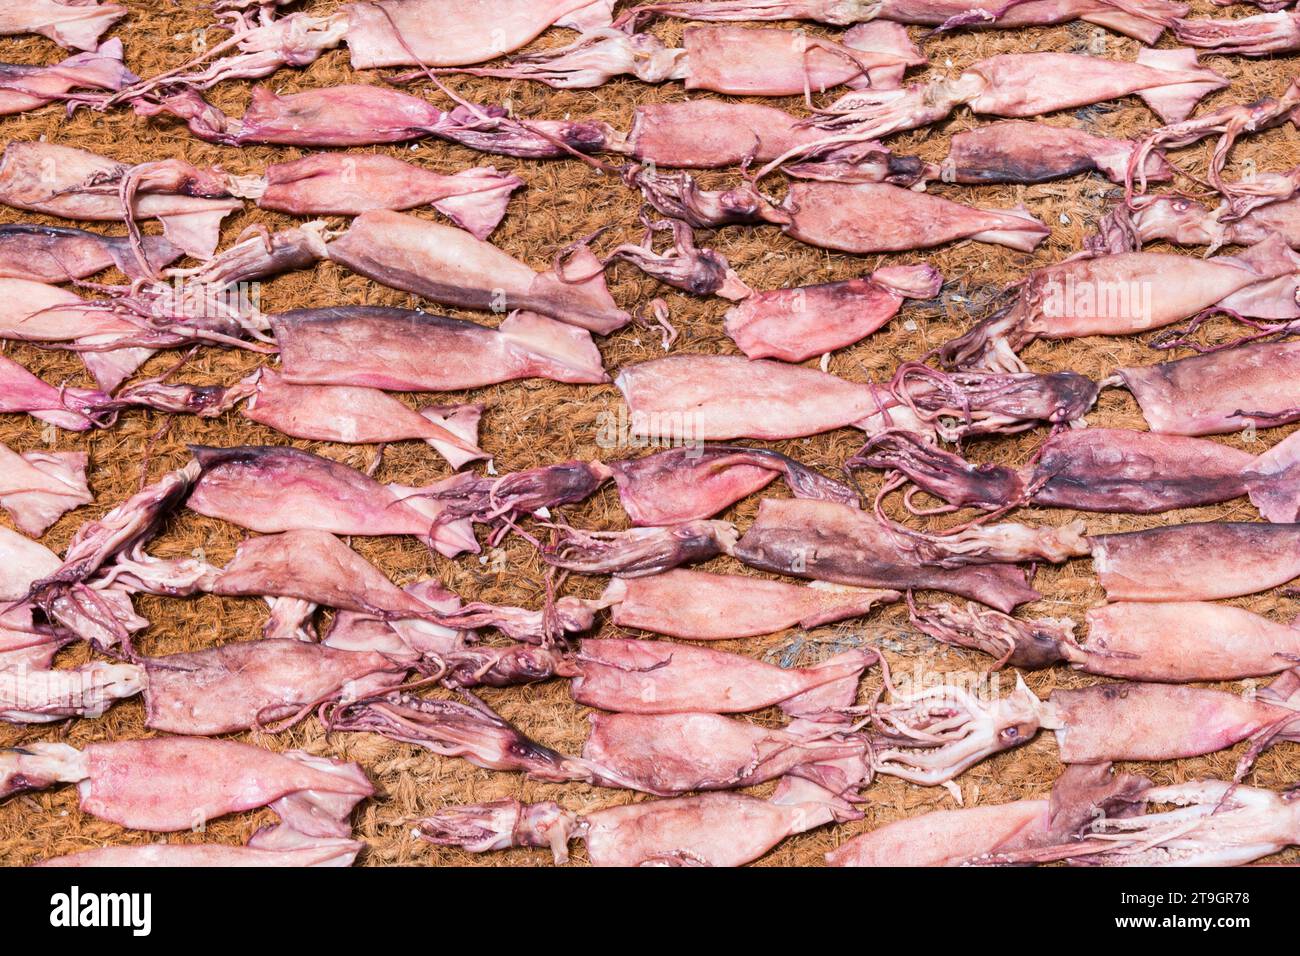 A catch of squid lies in a rattan rug to dry in the sunlight in Negombo Sri Lanka Stock Photo